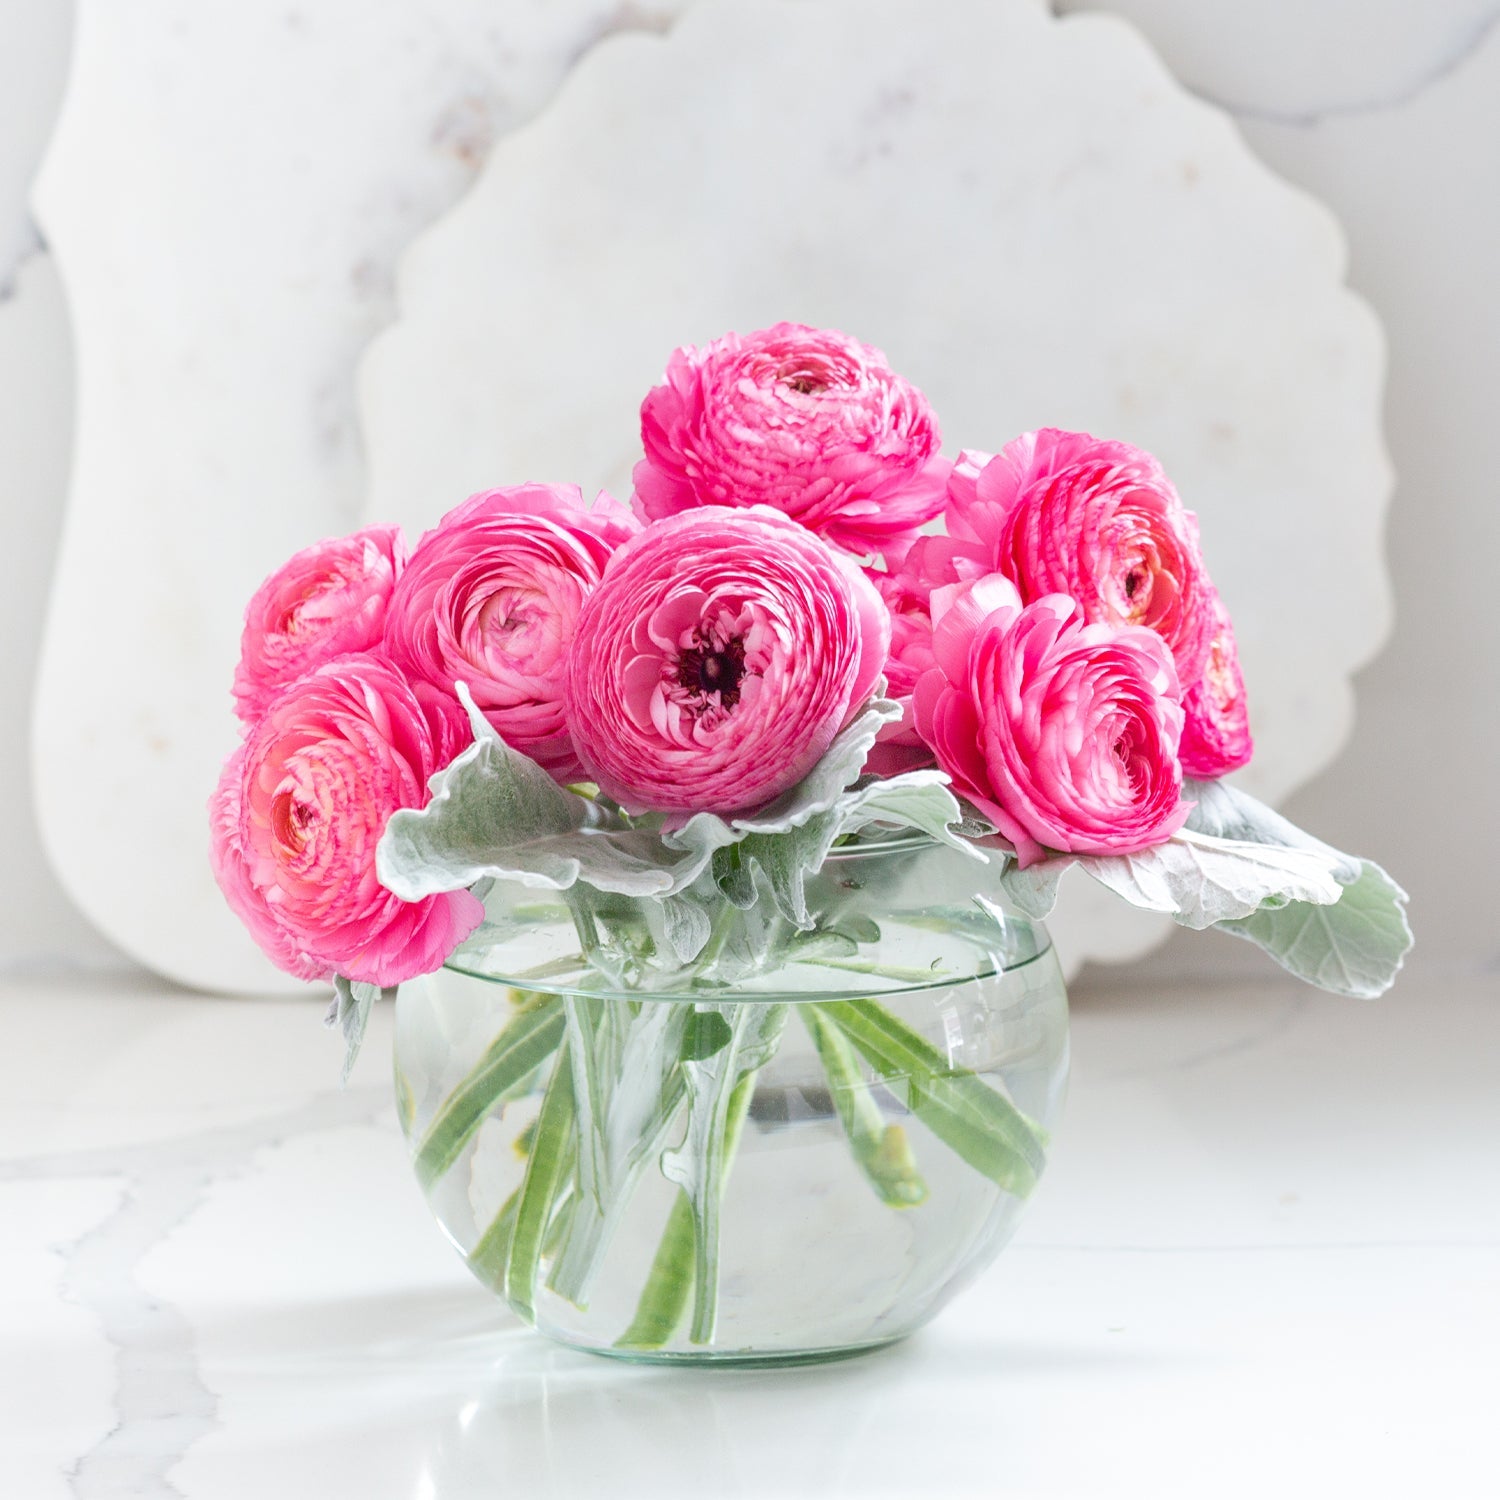 Vibrant pink ranunculus flowers in a recycled glass bubble ball vase on marble surface